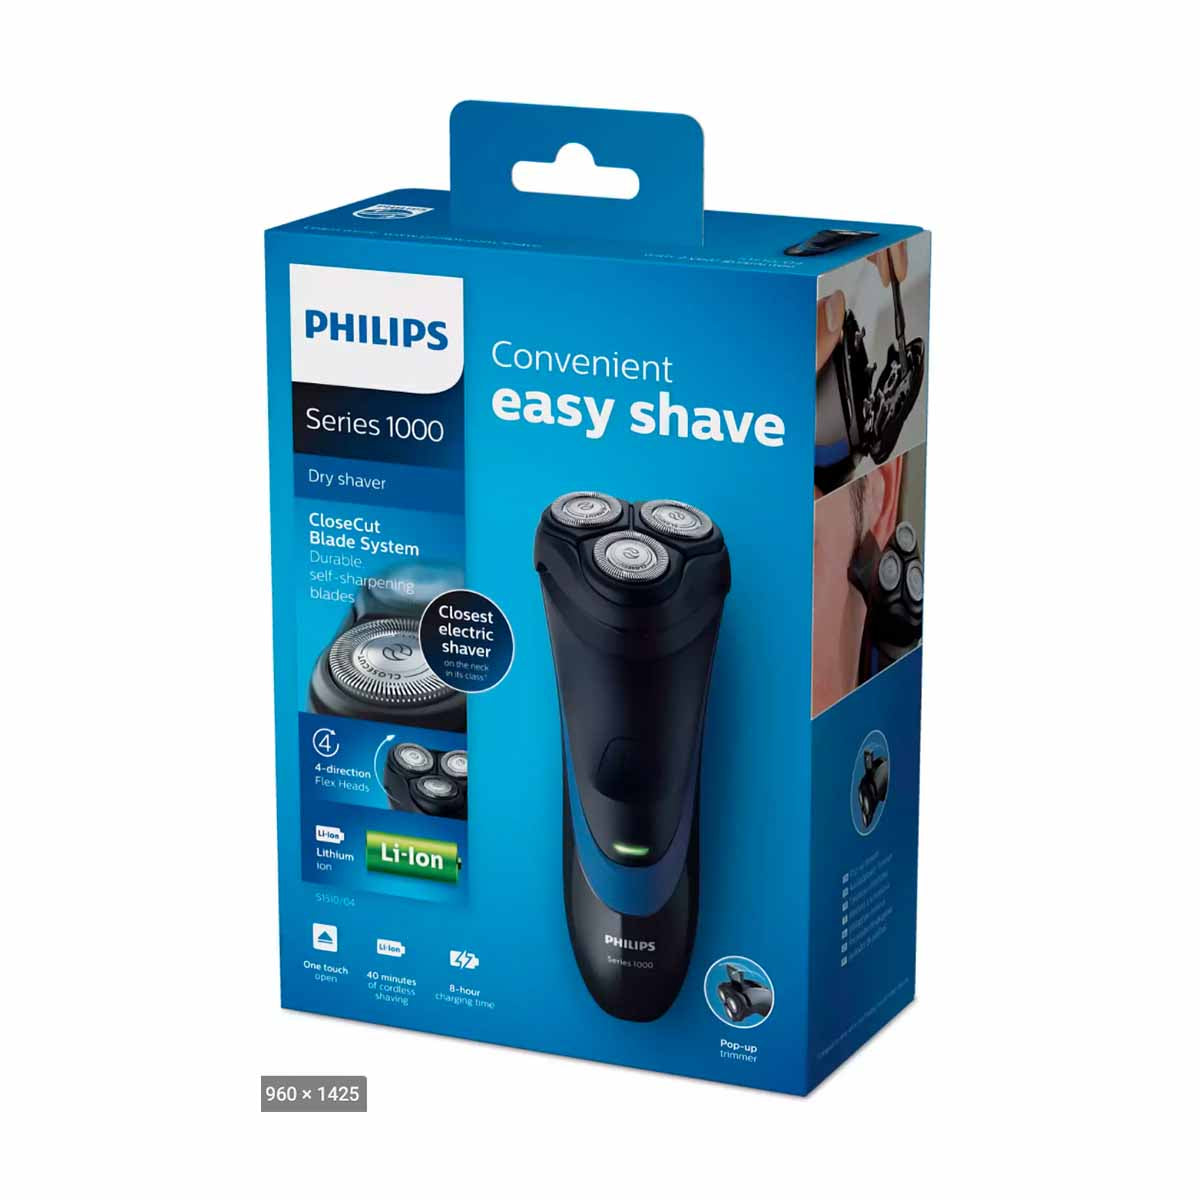 PHILIPS Shaver series 1000 dry electric shaver with pop-up trimmer S1510/04